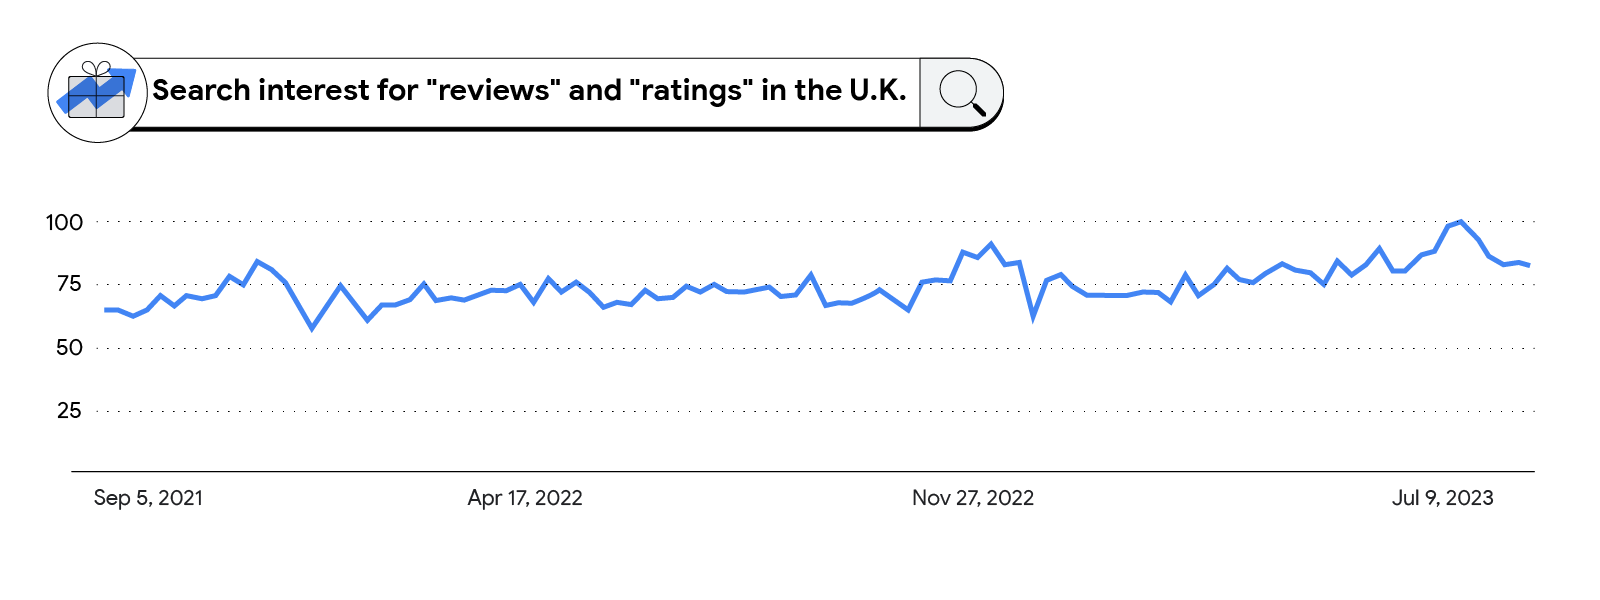 A search bar with a present icon on the left reads: “Search interest for ‘reviews’ and ‘ratings’ in the U.K.” Below, a line graph with a blue data set from September 5, 2021 to July 9, 2023, showing an increasing trend with multiple peaks.